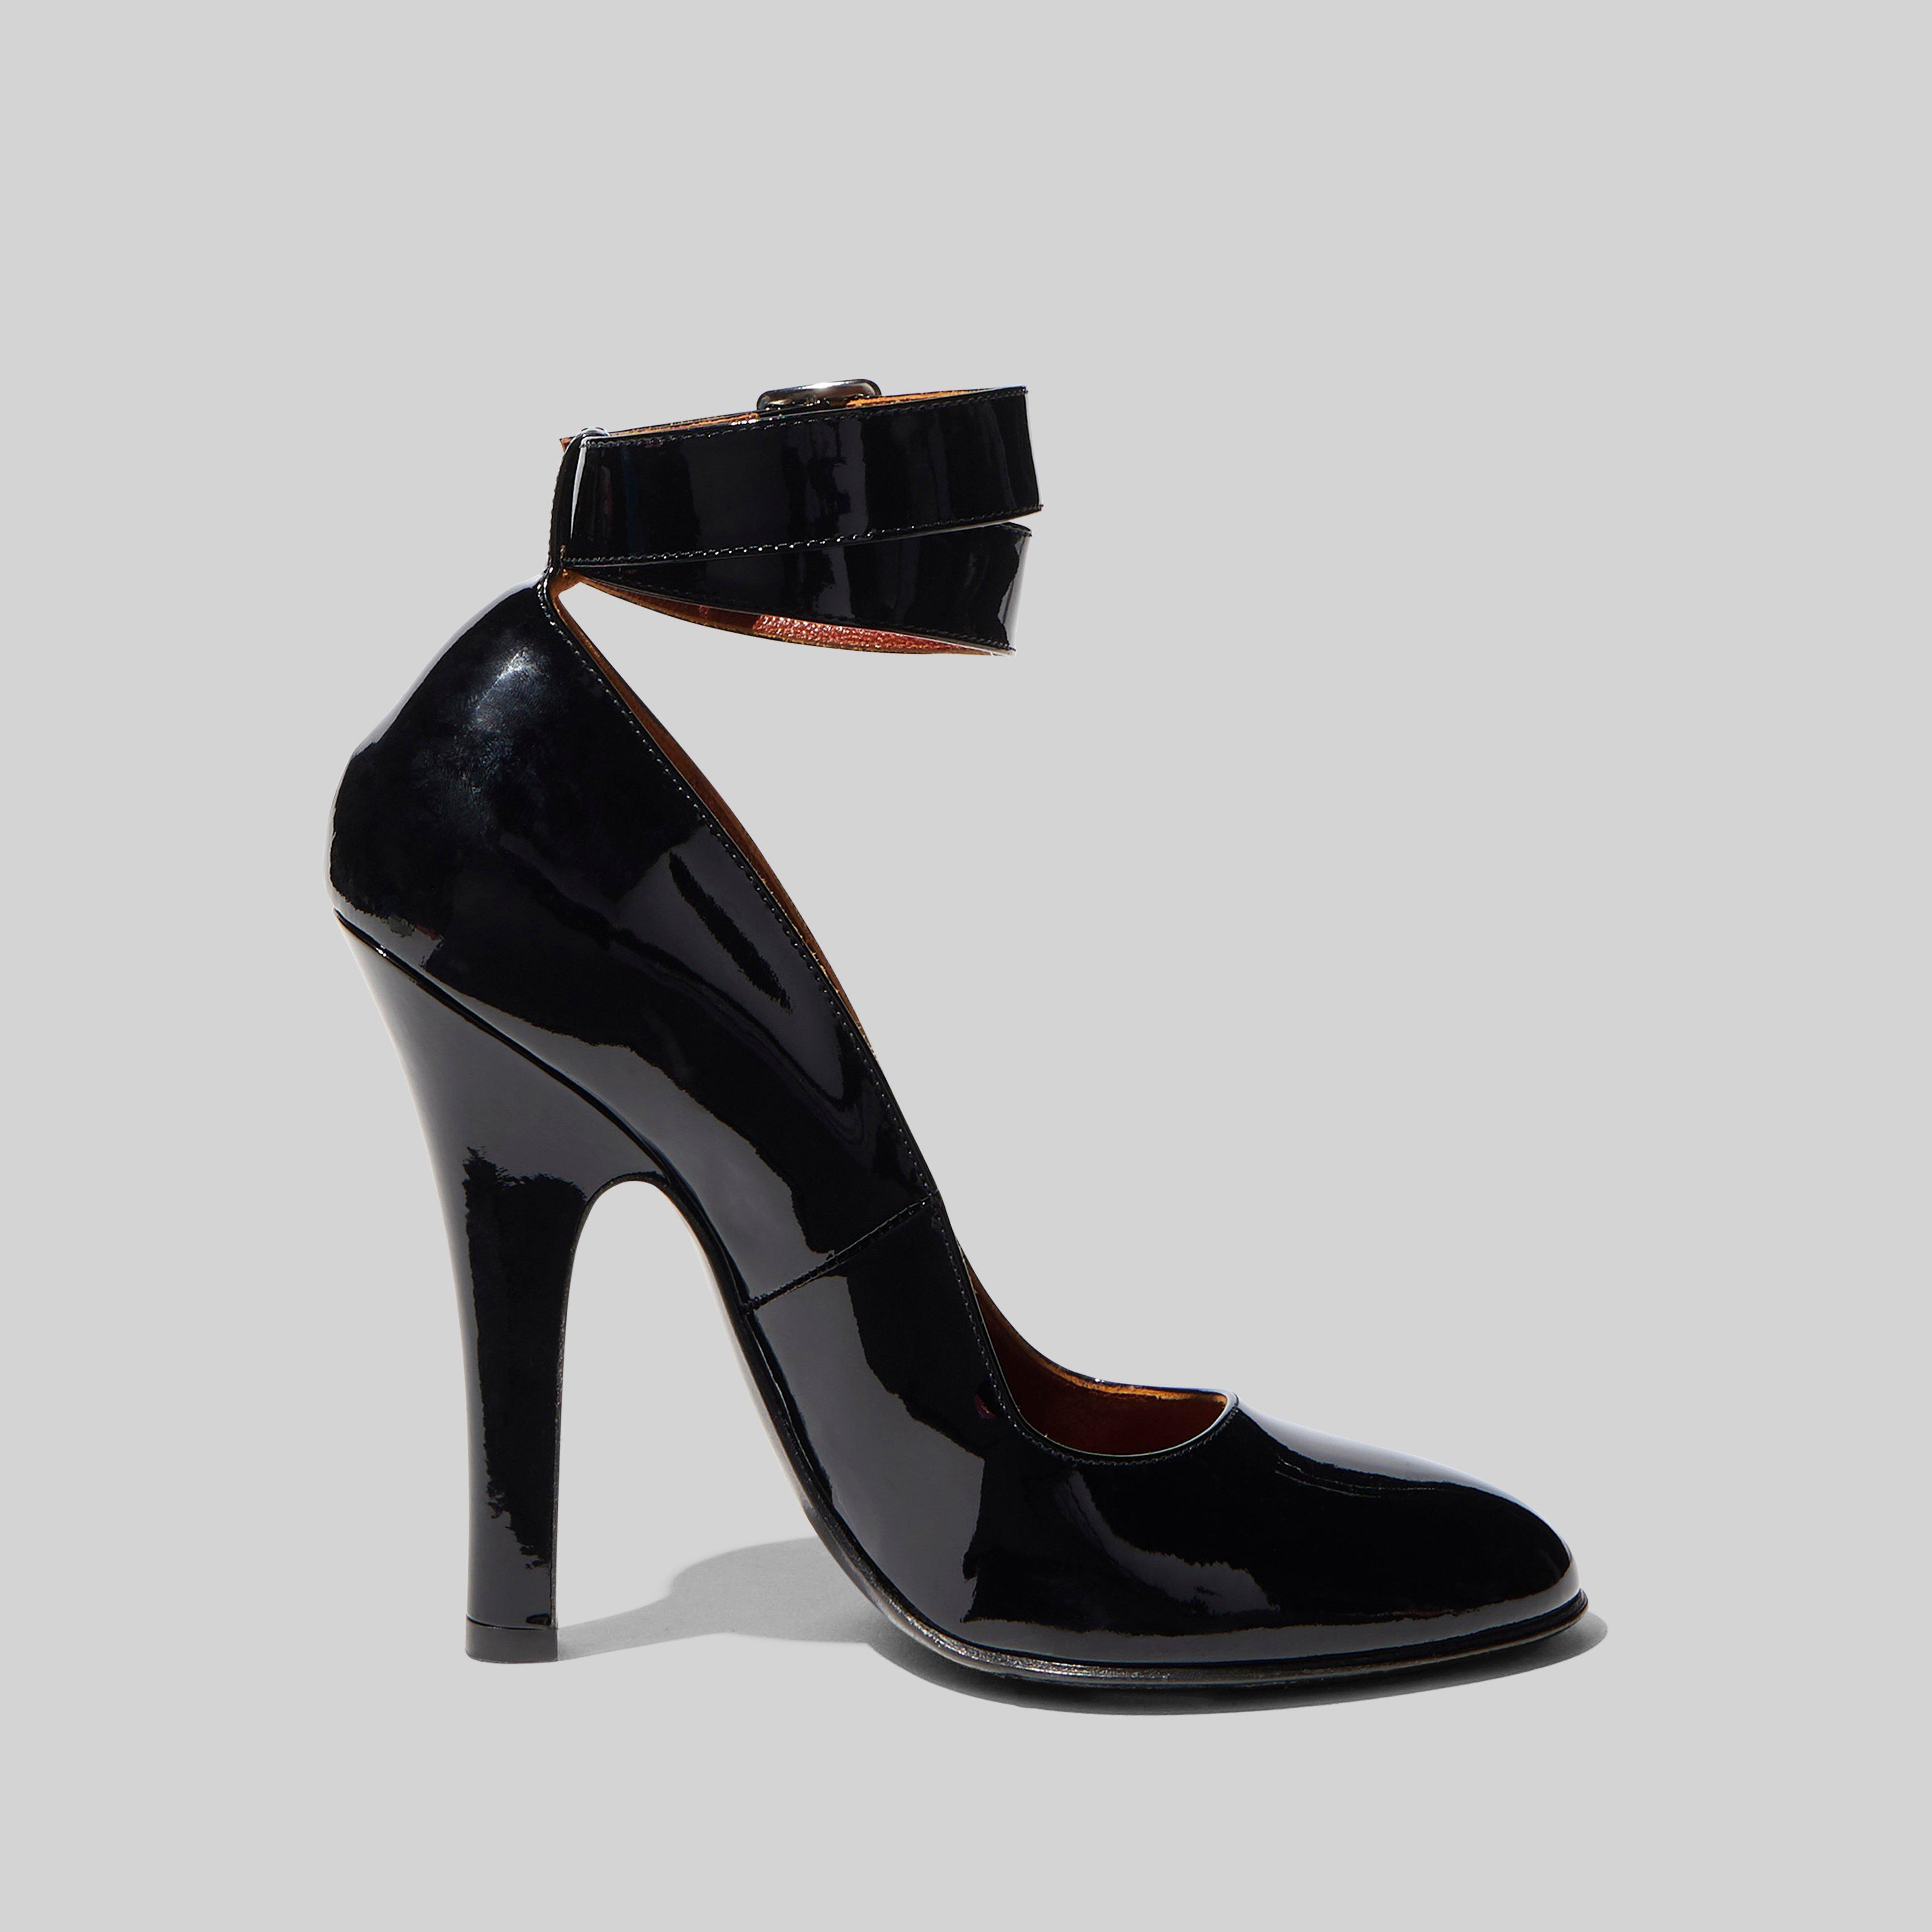 Marc Jacobs The Fetish Pumps Shoes in Black | Lyst